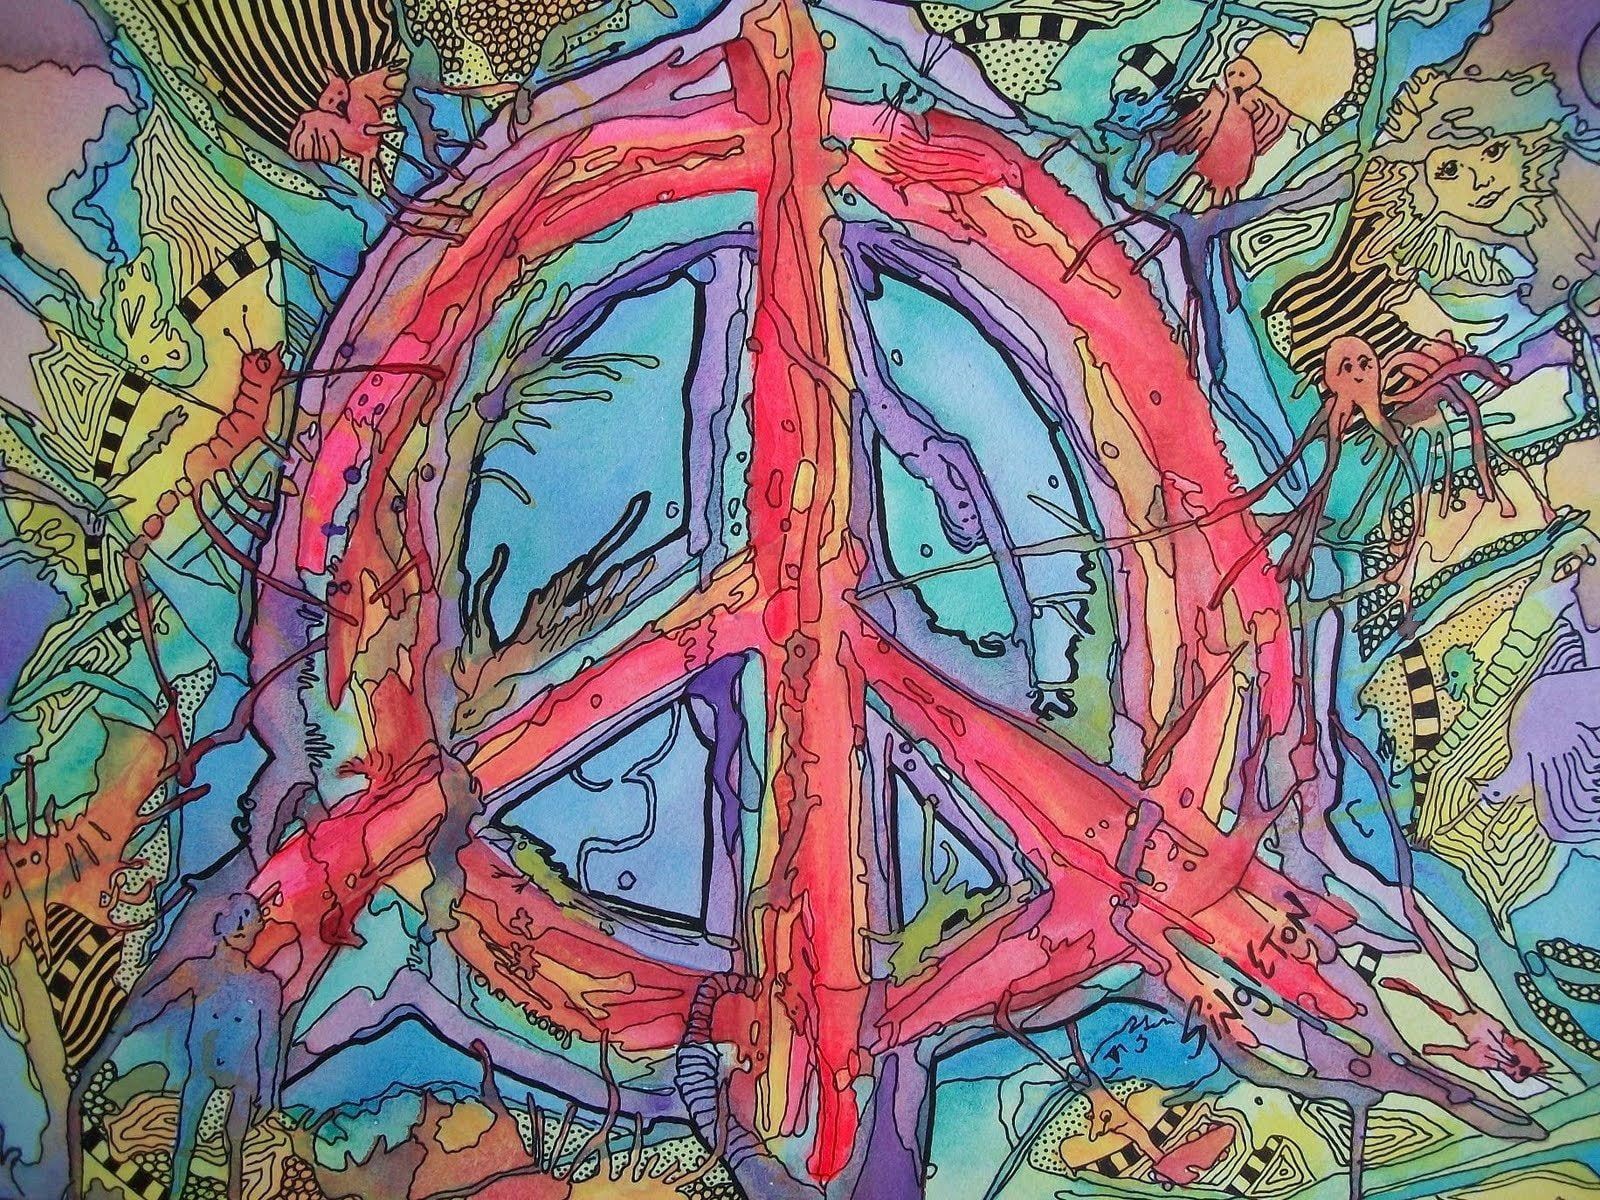 A painting of a peace sign surrounded by images of people and animals. - Peace